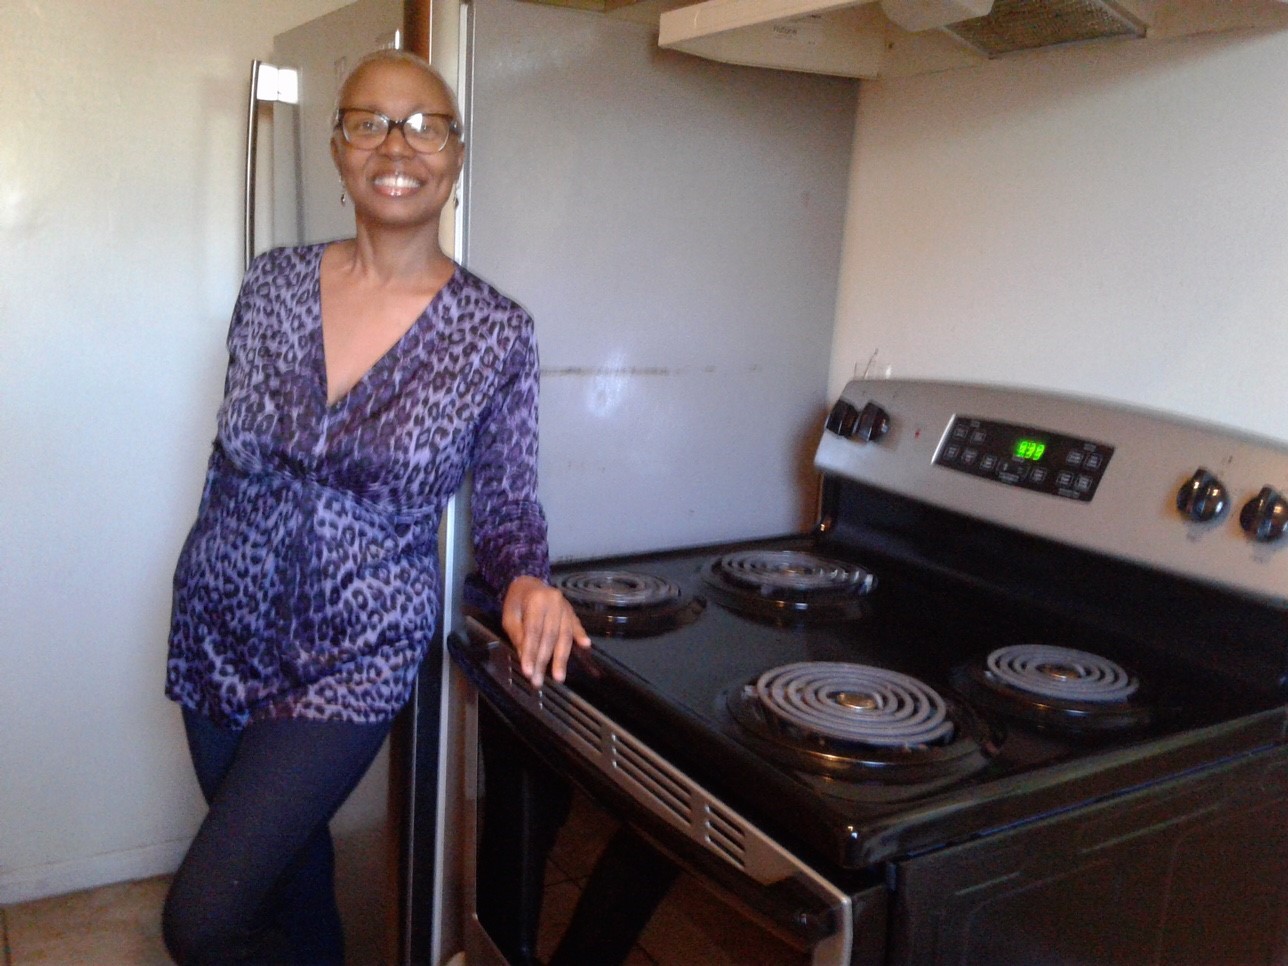 nichelle with stove.jpg